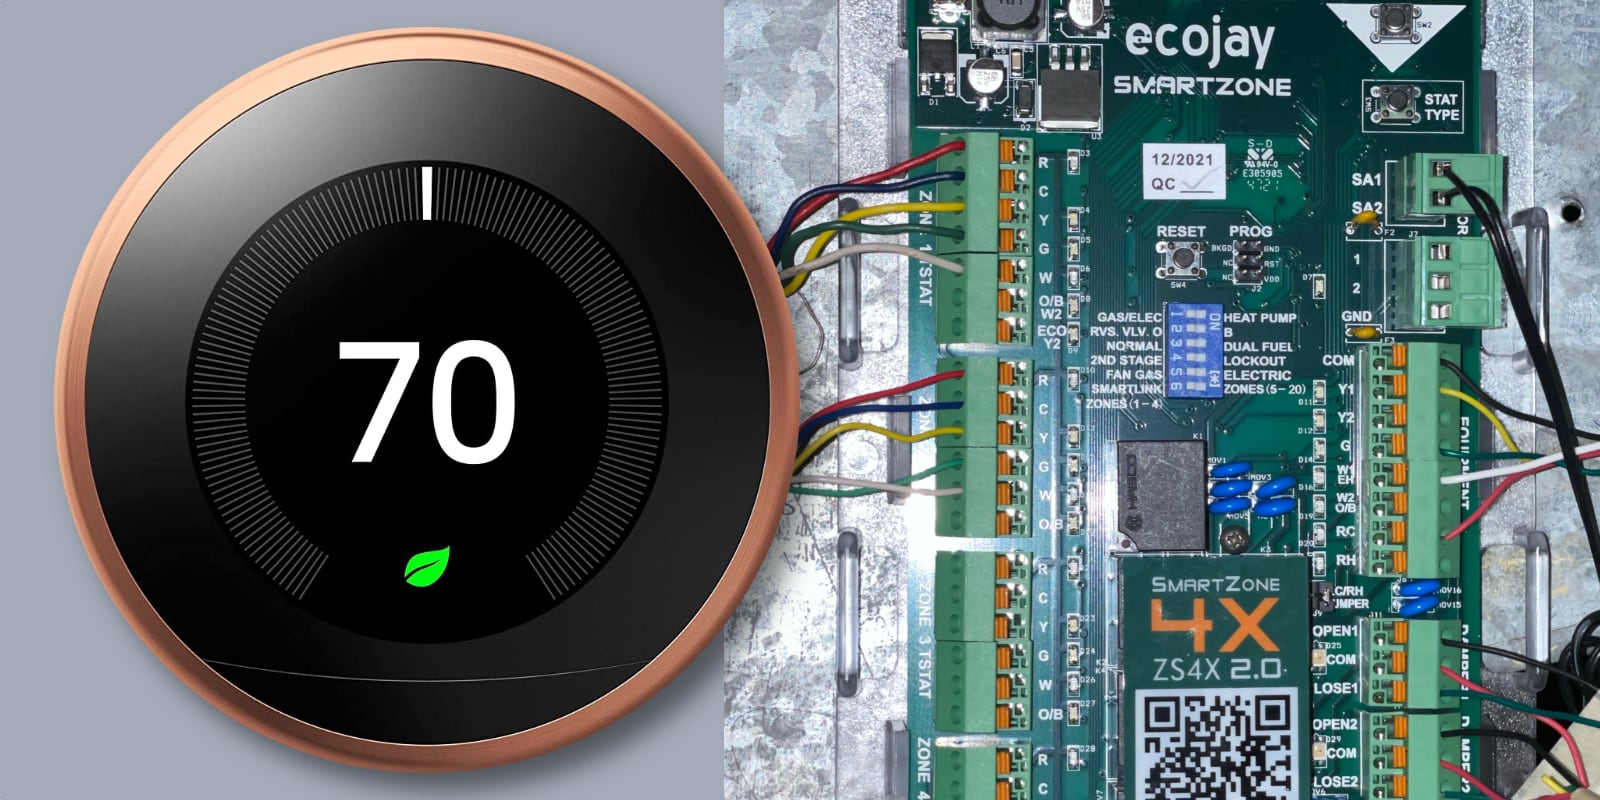 Nest thermostat and zone controller